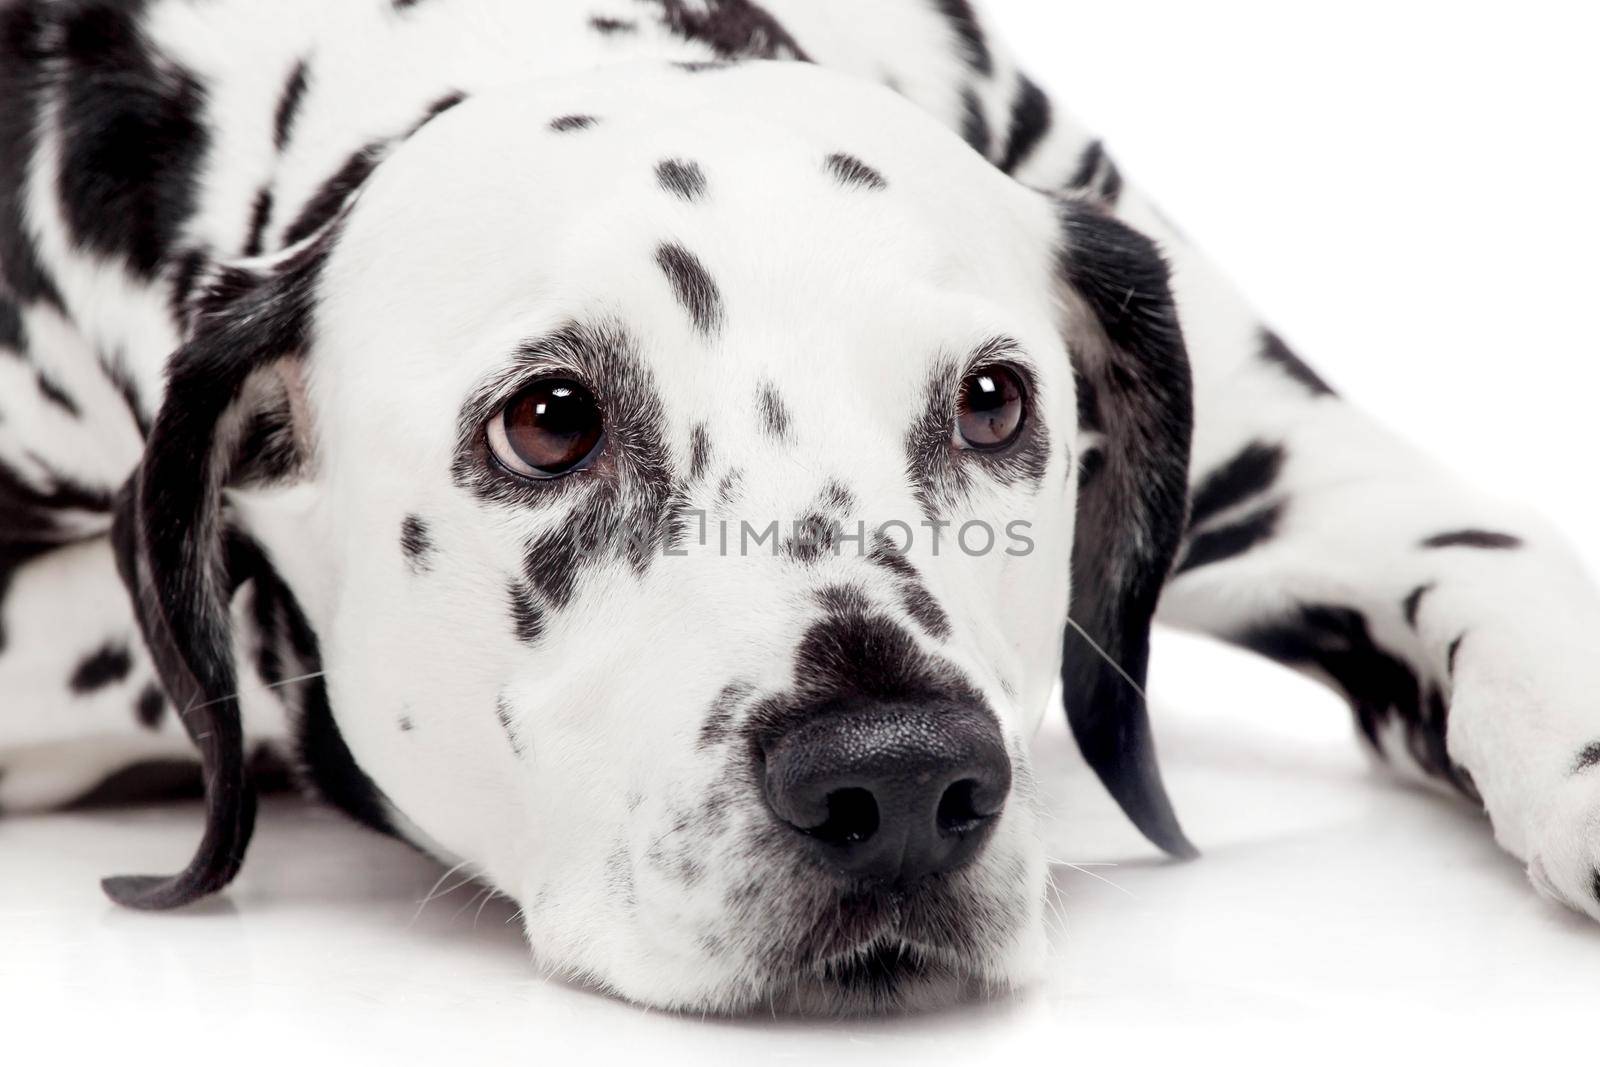 Dalmatian dog, isolated on white by RosaJay